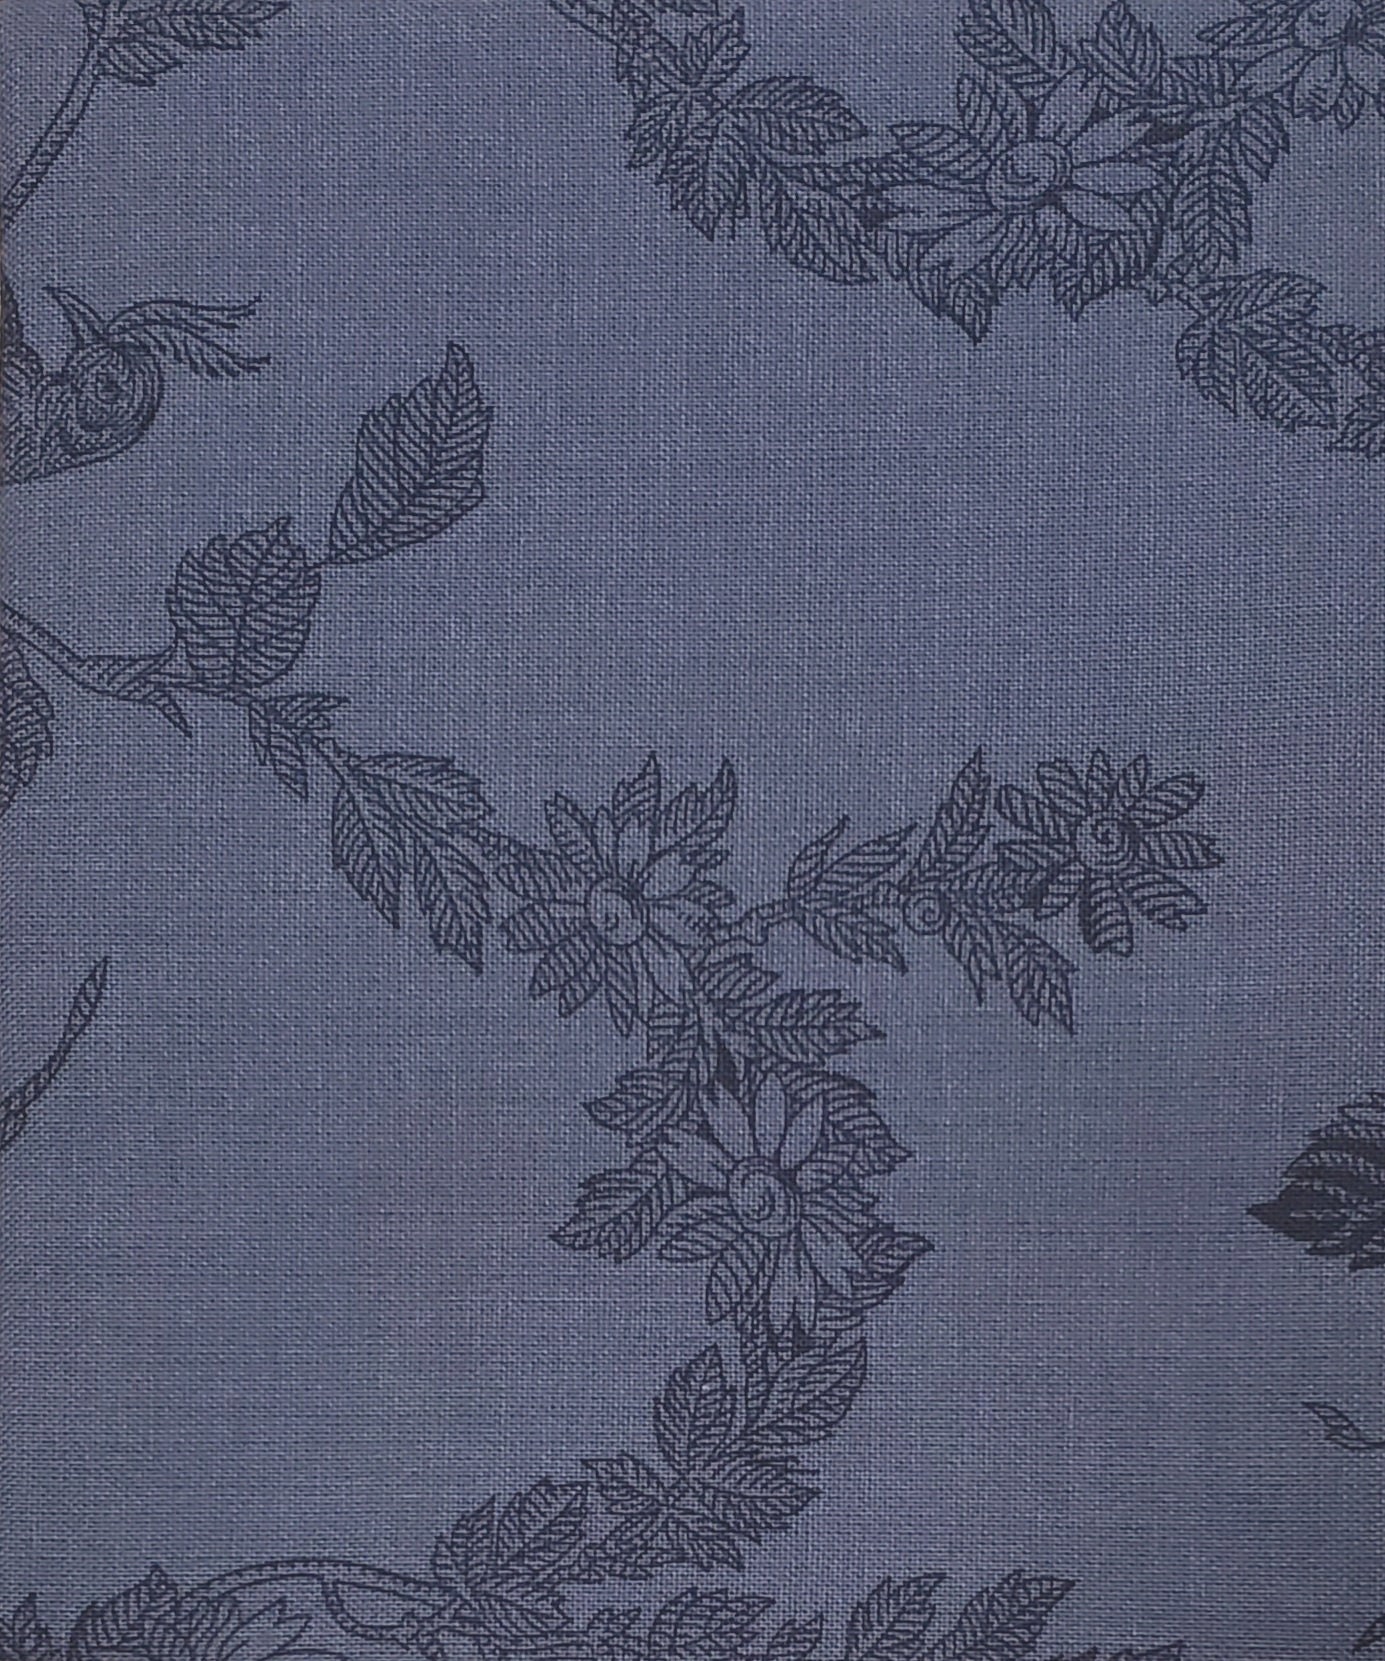 Boundless Plume Toile Navy Cotton Fabric 6 Yard Package | Etsy